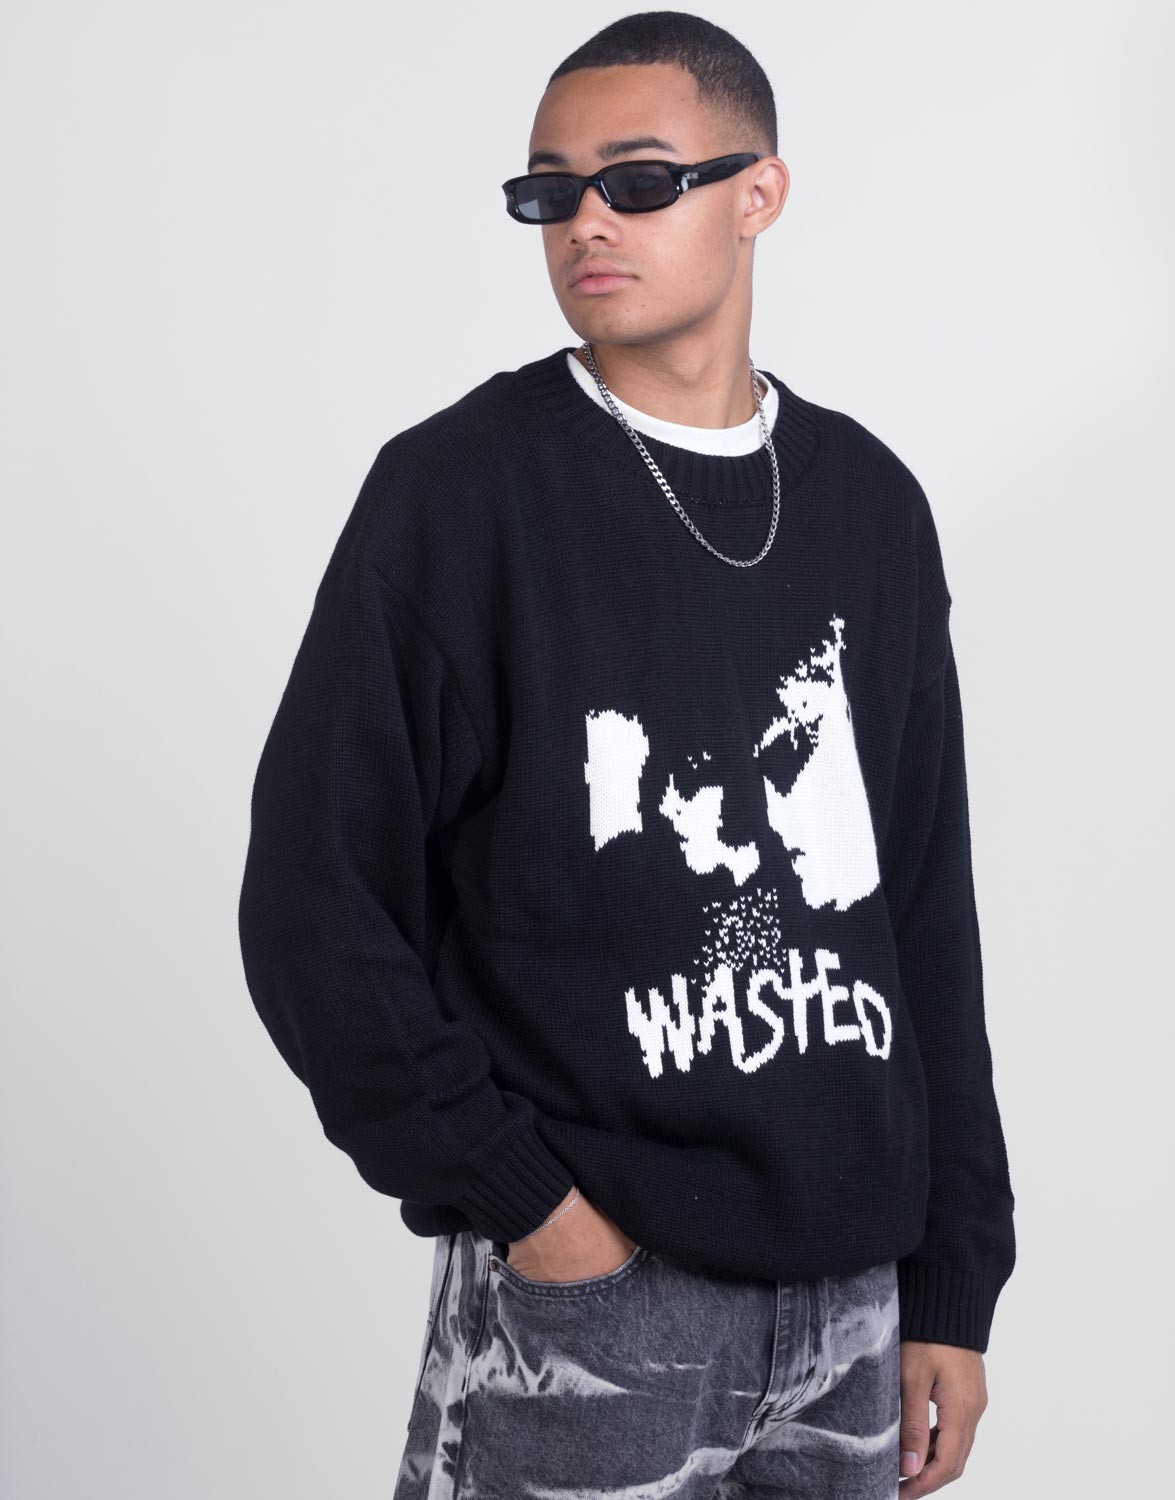 Wasted Paris Youth Sweater